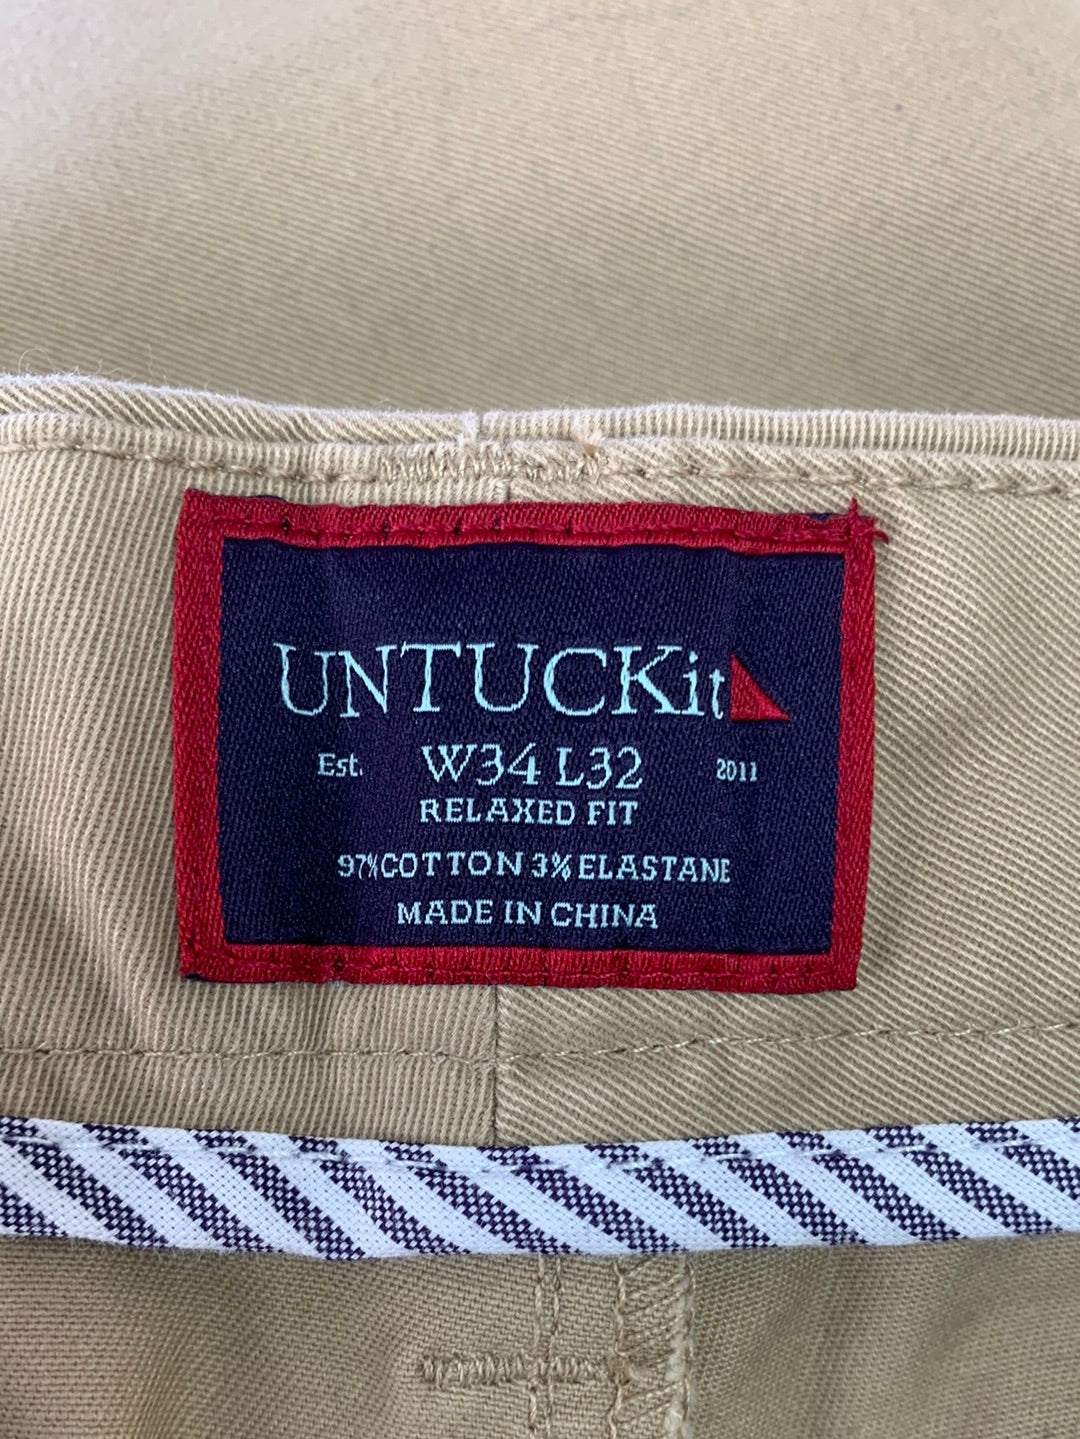 NWT - UNTUCKIT tan khaki Relaxed Fit St. Clair Pants - 34x32